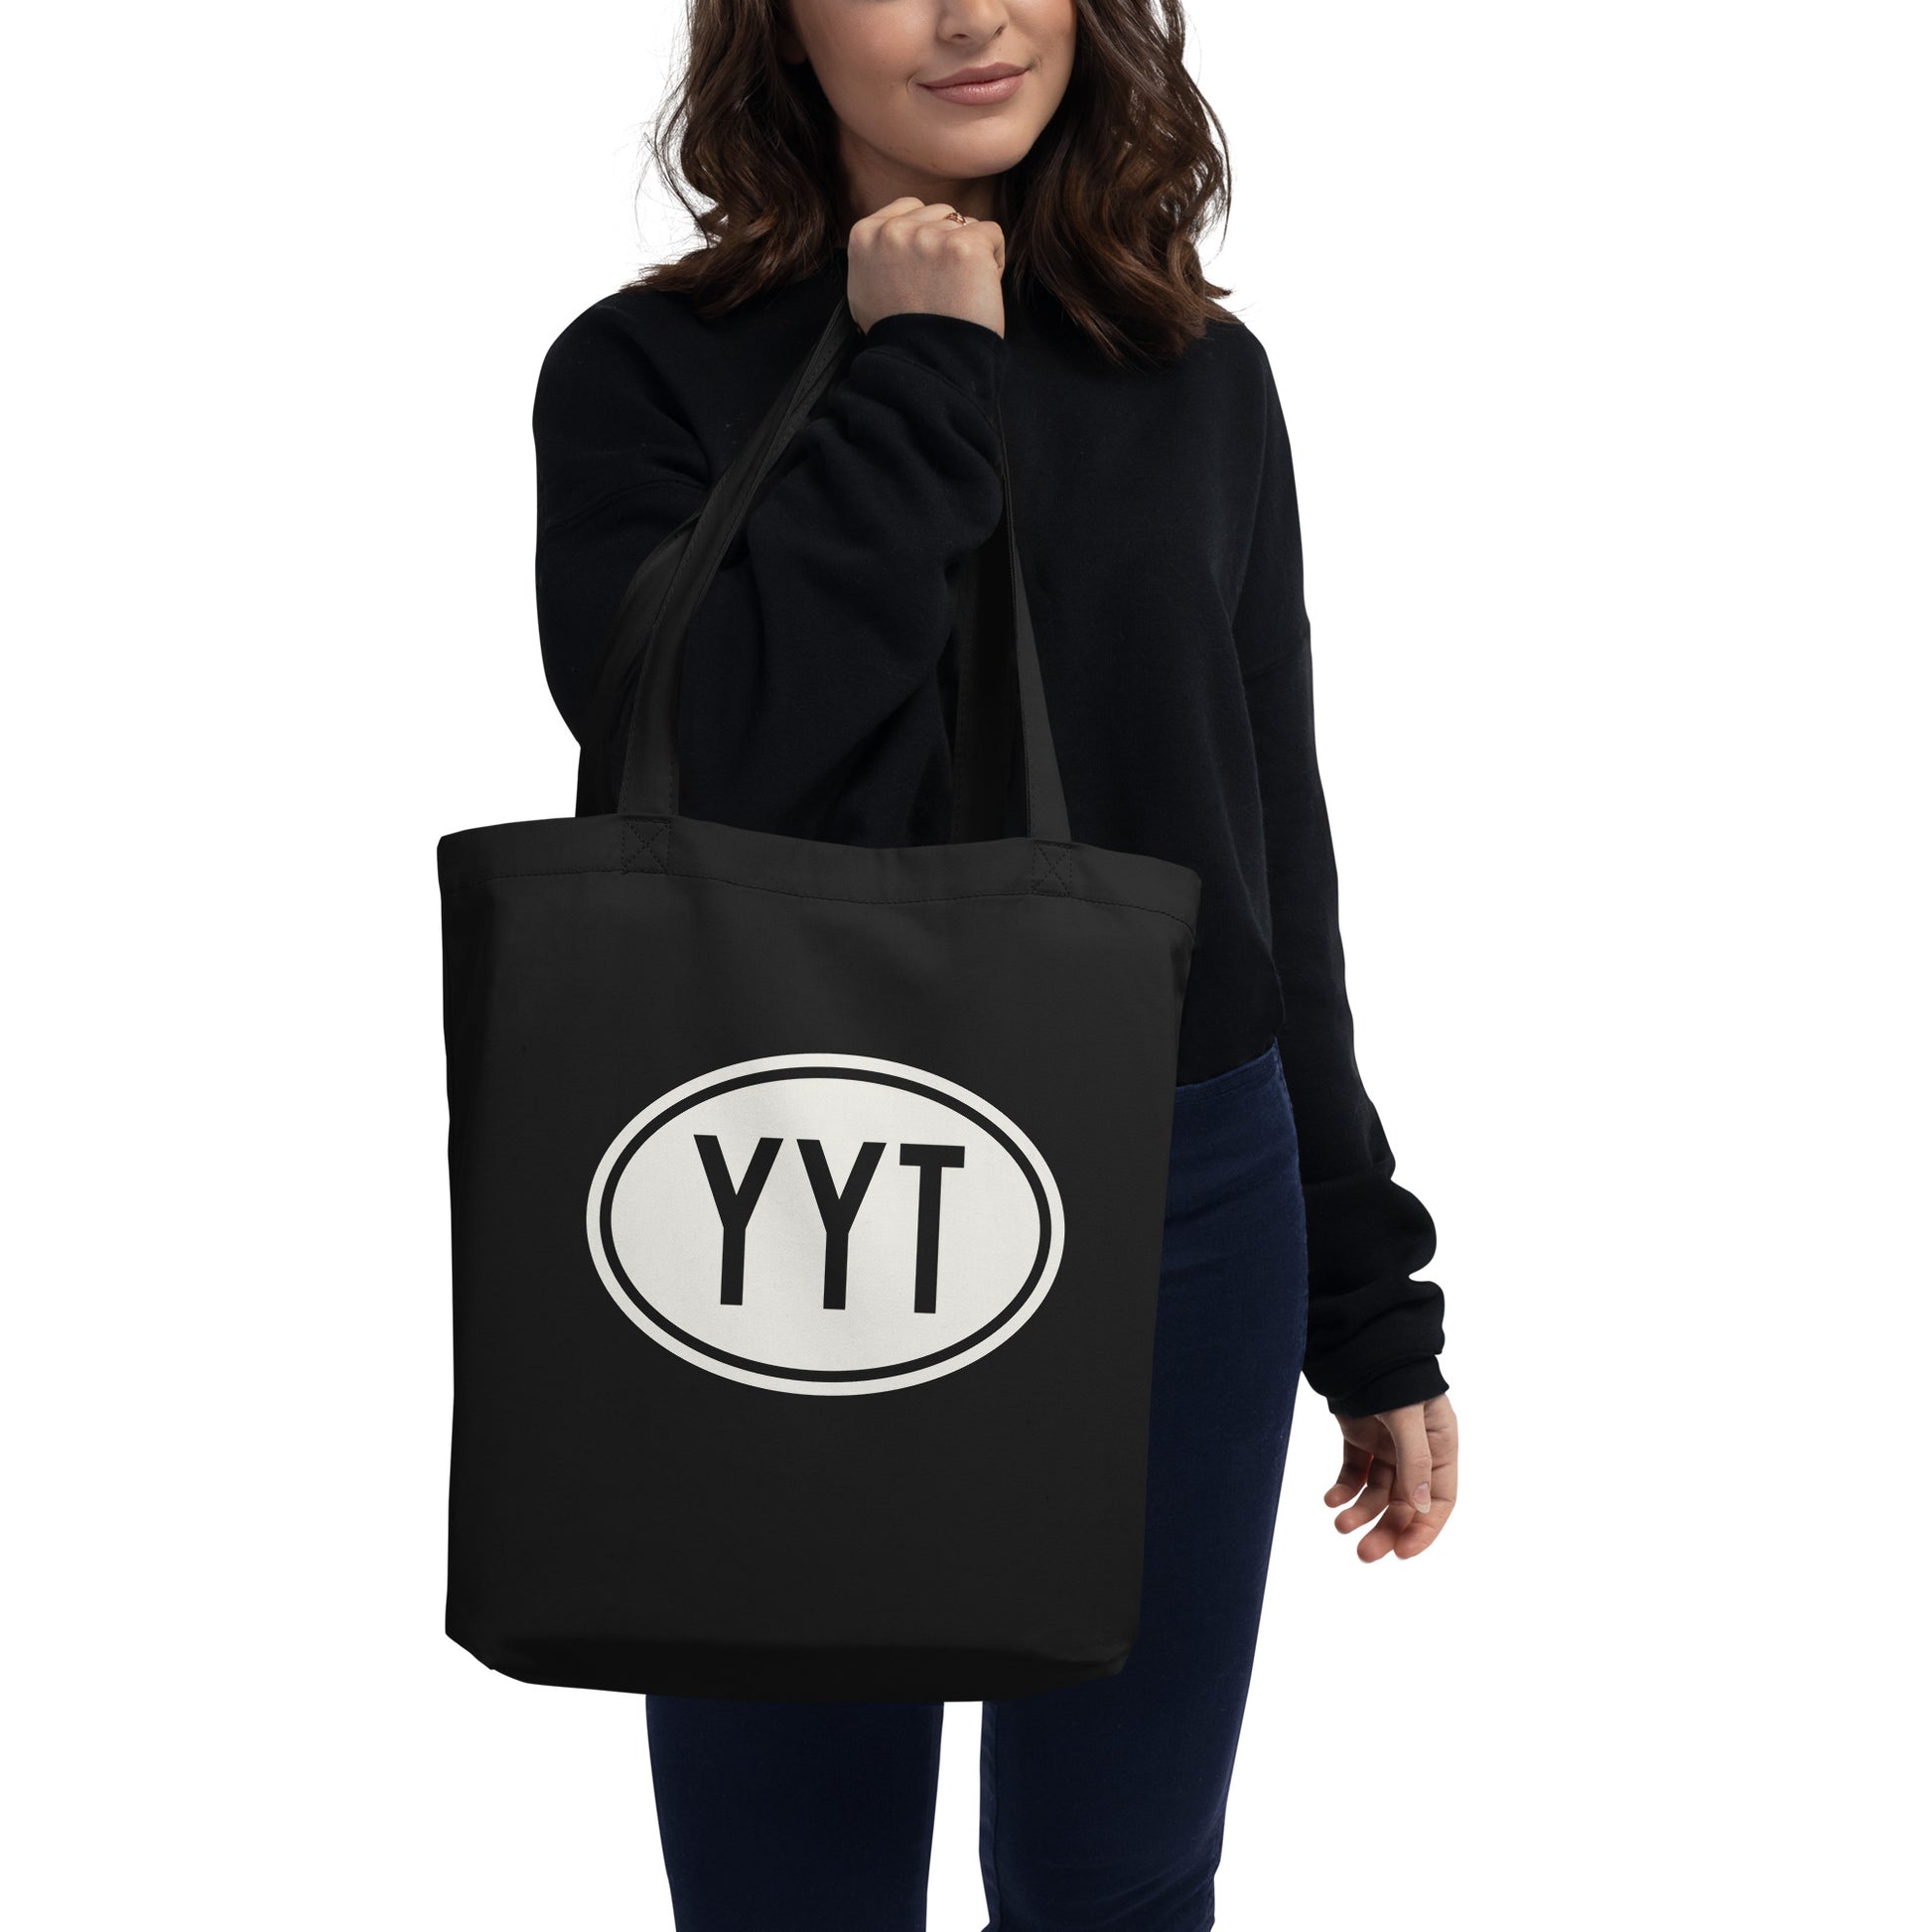 Unique Travel Gift Organic Tote - White Oval • YYT St. John's • YHM Designs - Image 03